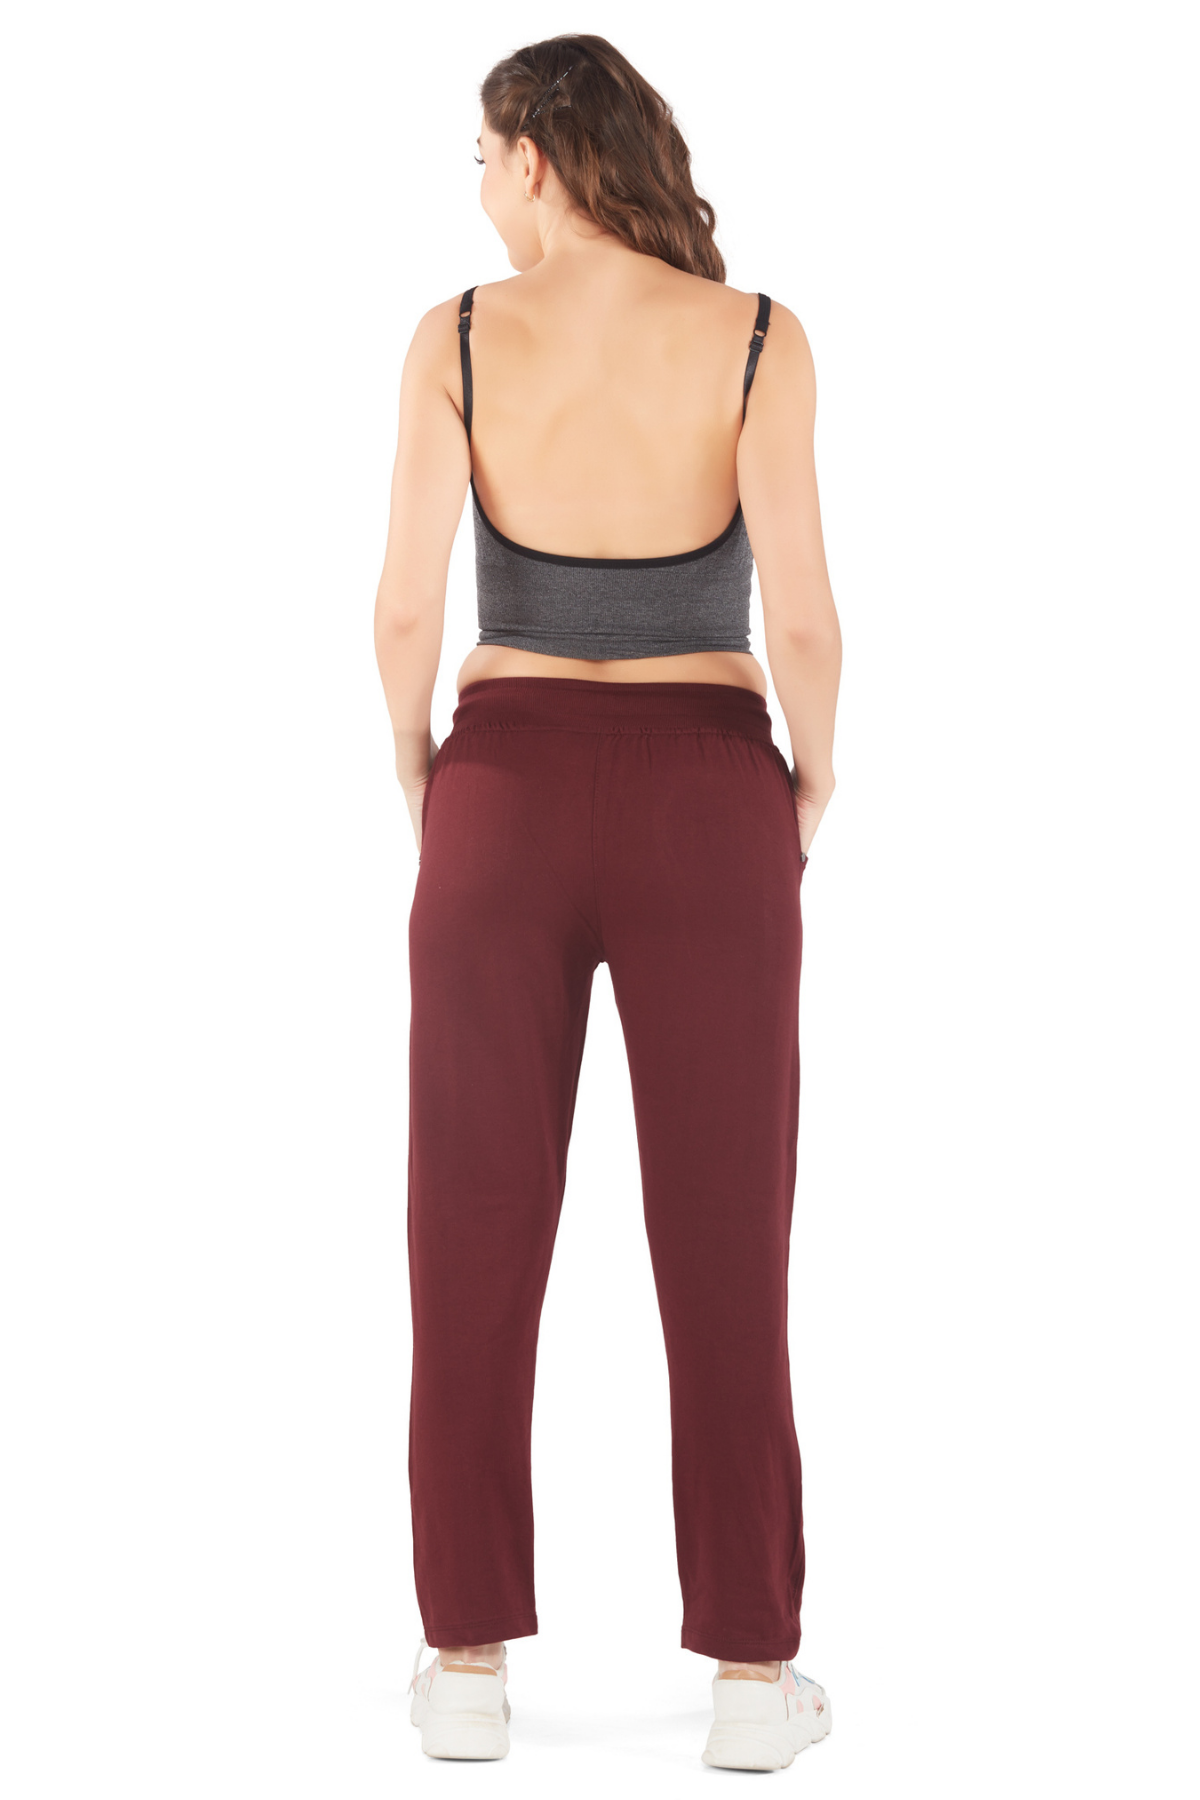 Buy Regular Fit Cotton Lounge Pants for Women Online In India -  Cupidclothings – Cupid Clothings